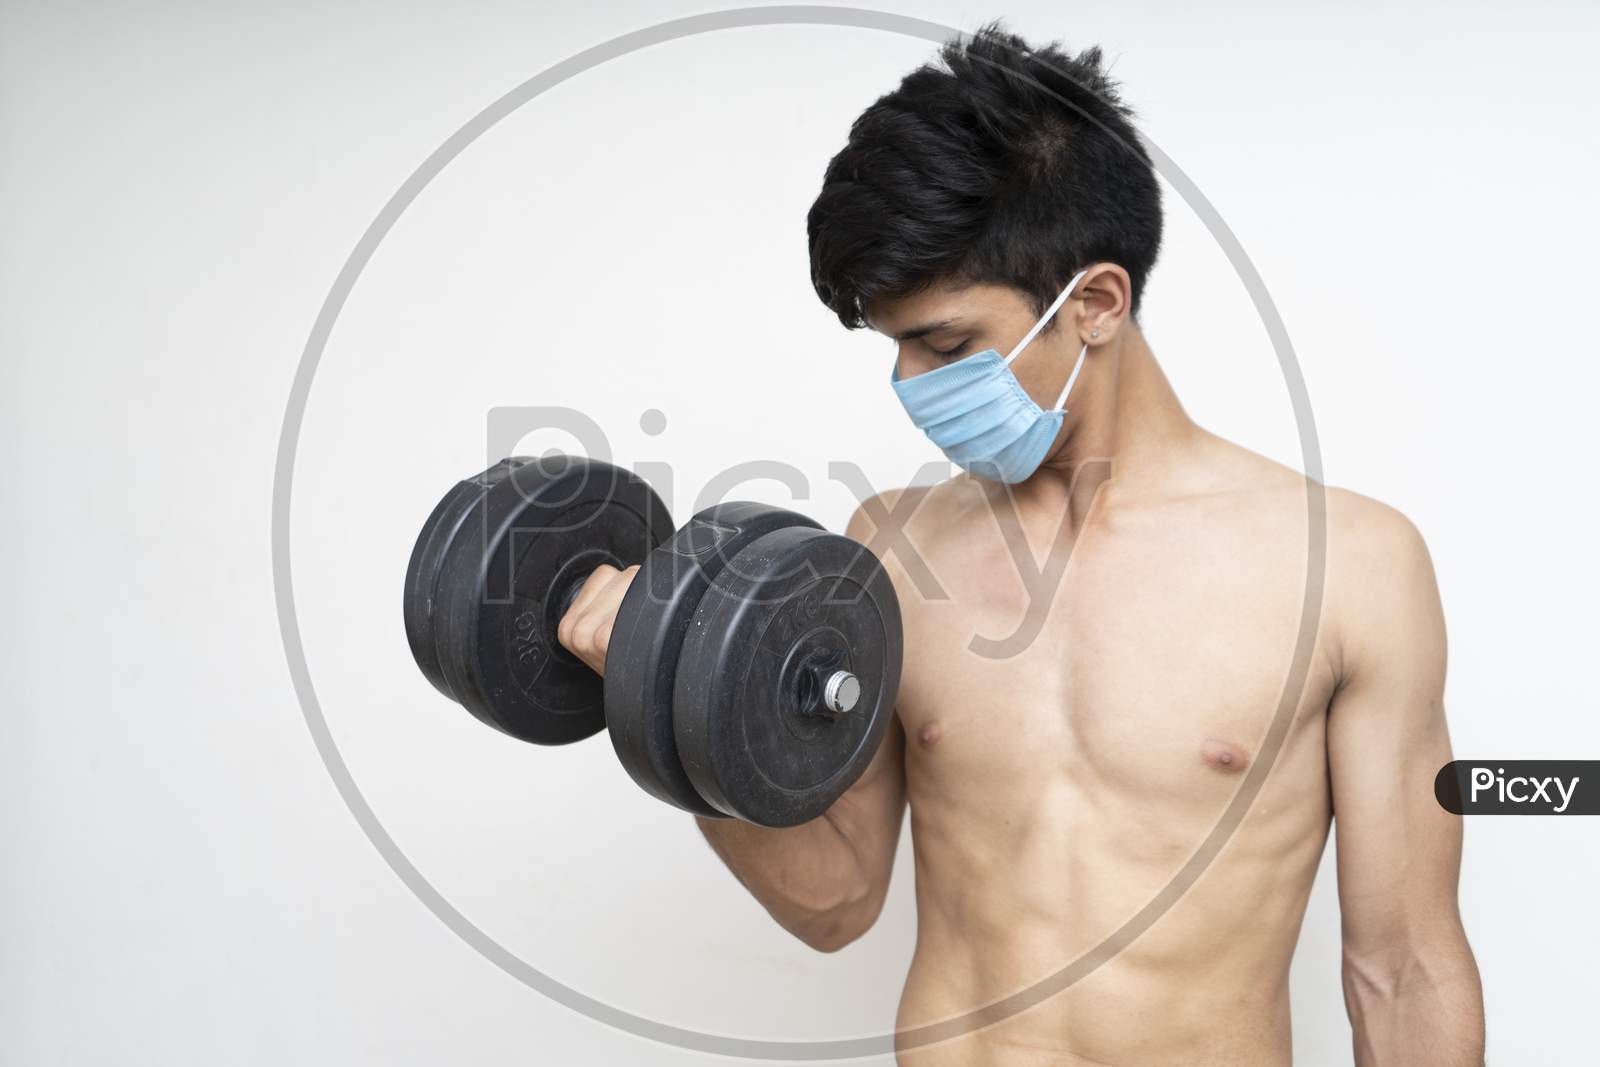 Fitness Man With Mask For Epidemic Protection Working Exercise For Arm,Biceps, And Shoulders With Dumbbells.Training In Epidemic Timefitness Man With Mask For Epidemic Protection Working Exercise For Arm,Biceps, And Shoulders With Dumbbells.Training In Epidemic Time